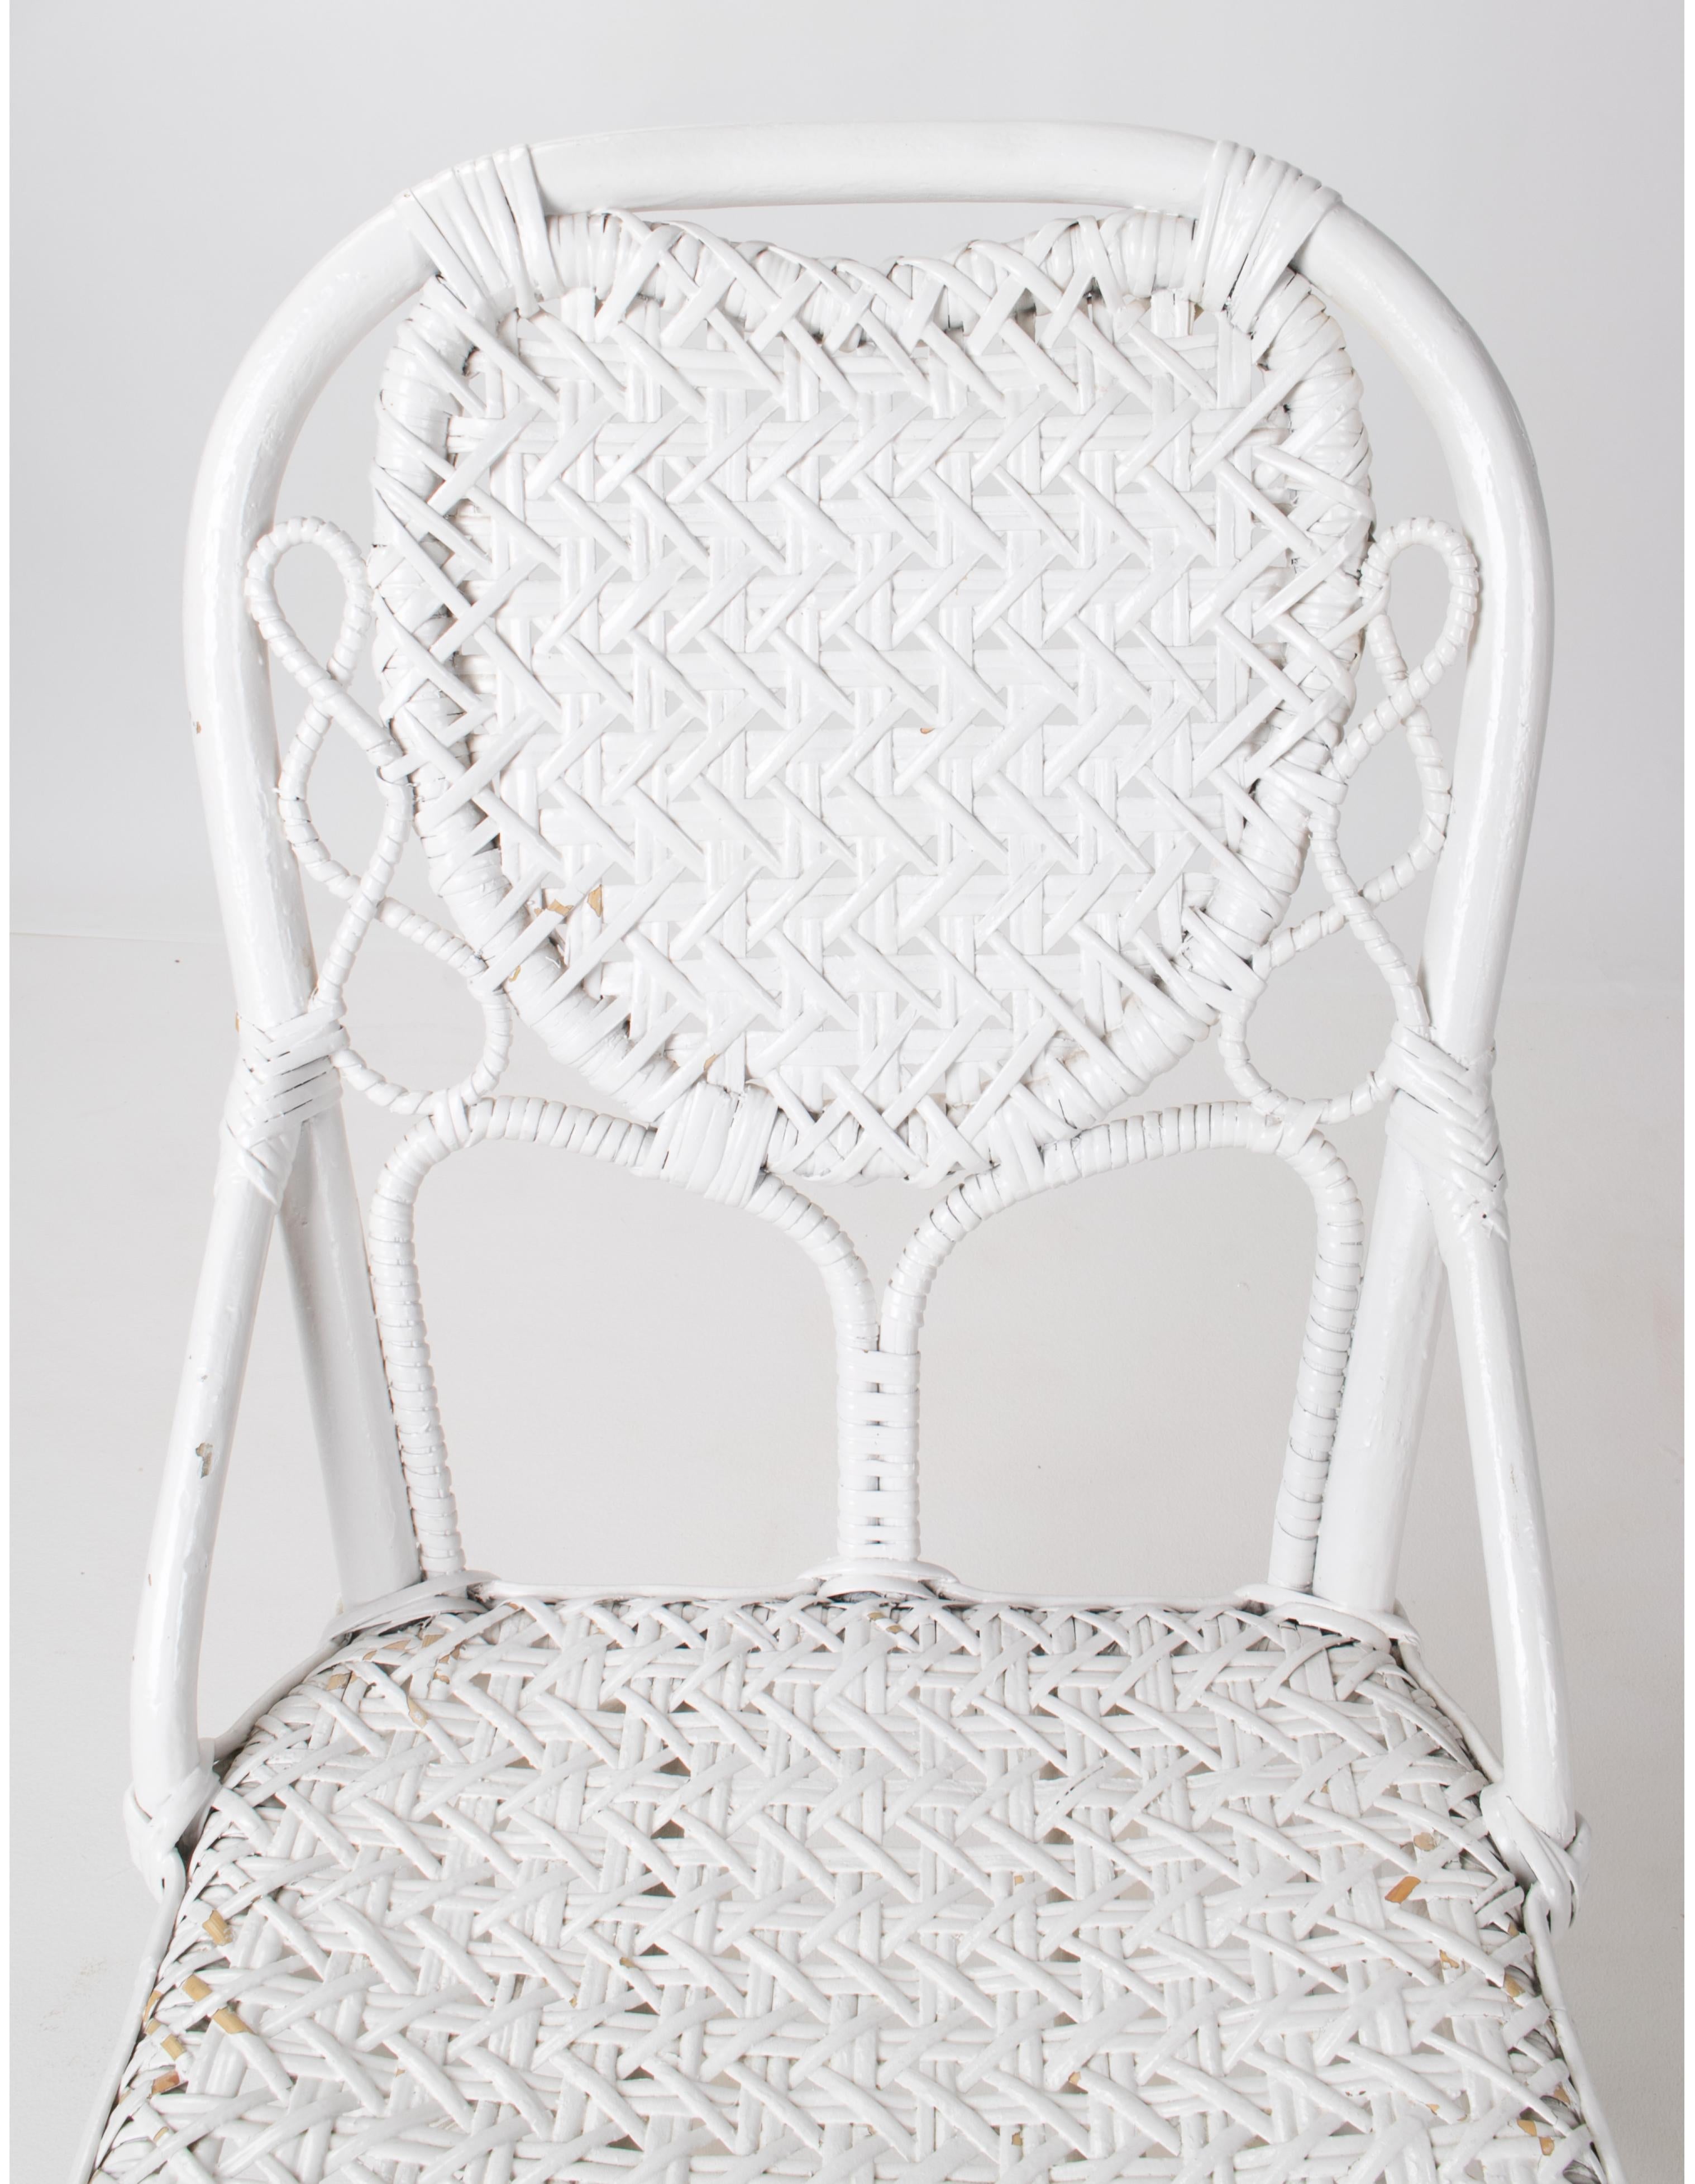 1970s Pair of Spanish Handmade White Wicker Wooden Chairs For Sale 3